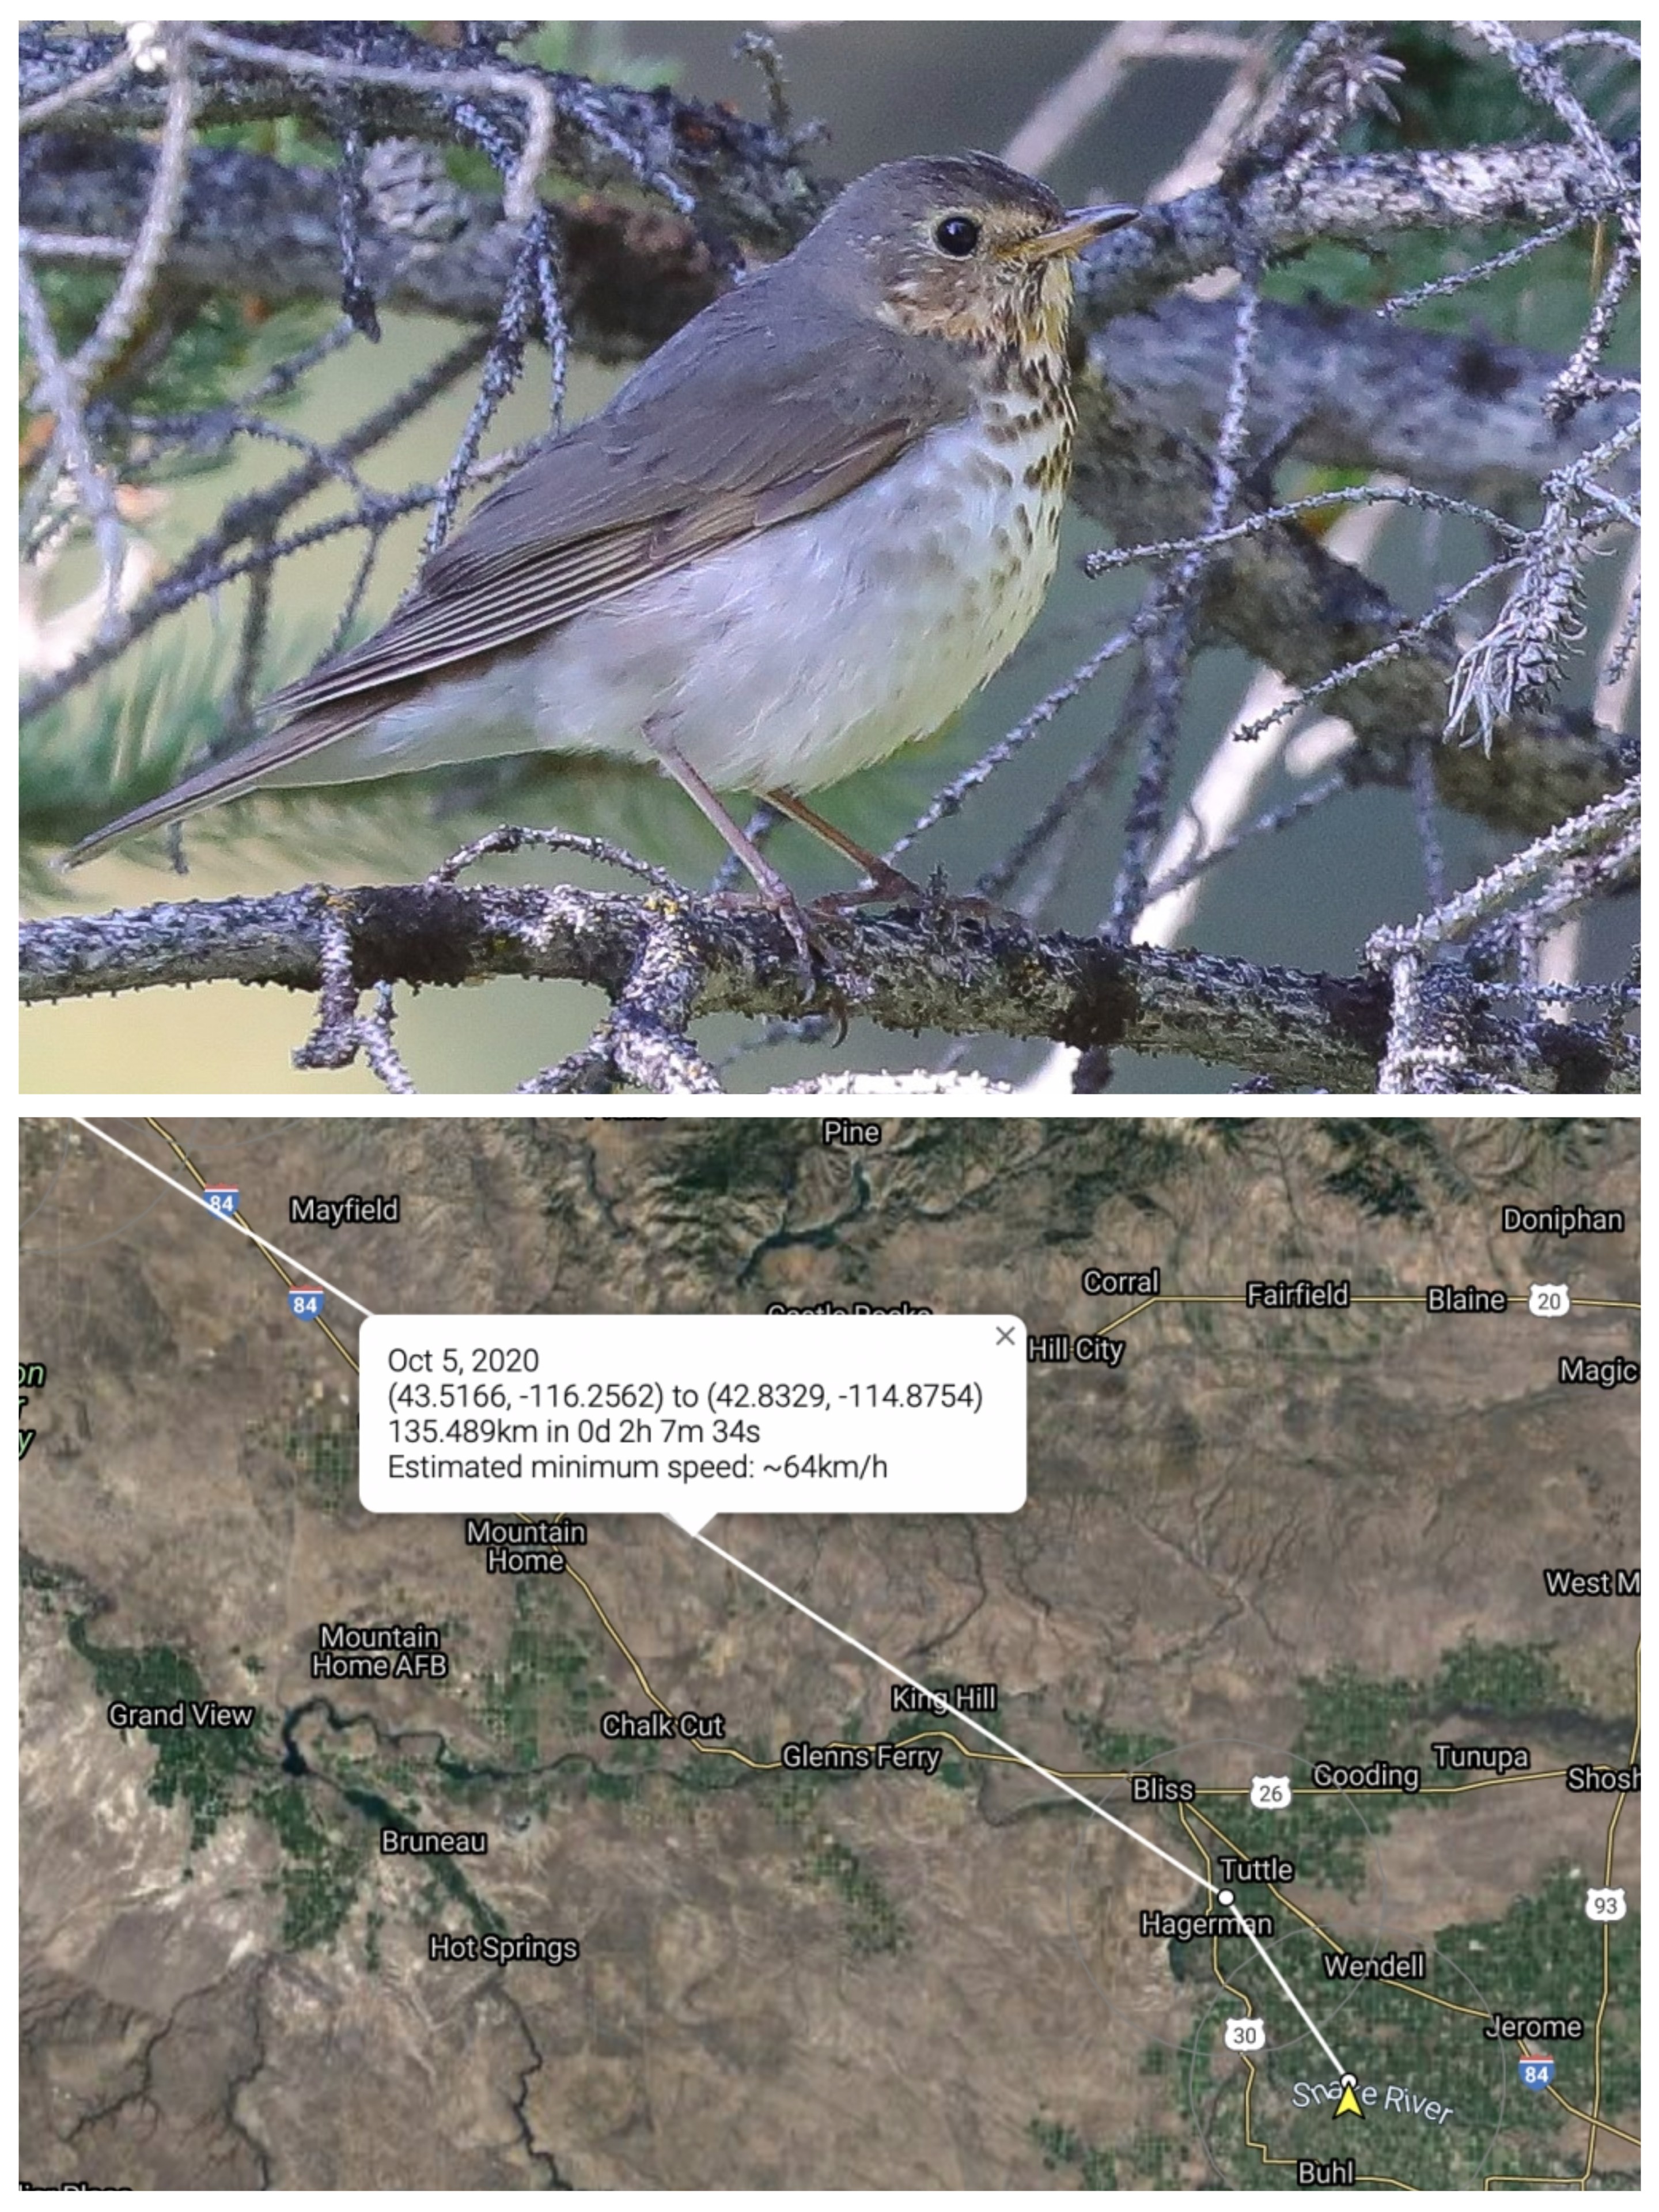 top image shows a swainson's thrush which is a small brown bird with white spotted chest. bottom image shows a map of towns in Idaho with a pin placed near Mountain Home Idaho.